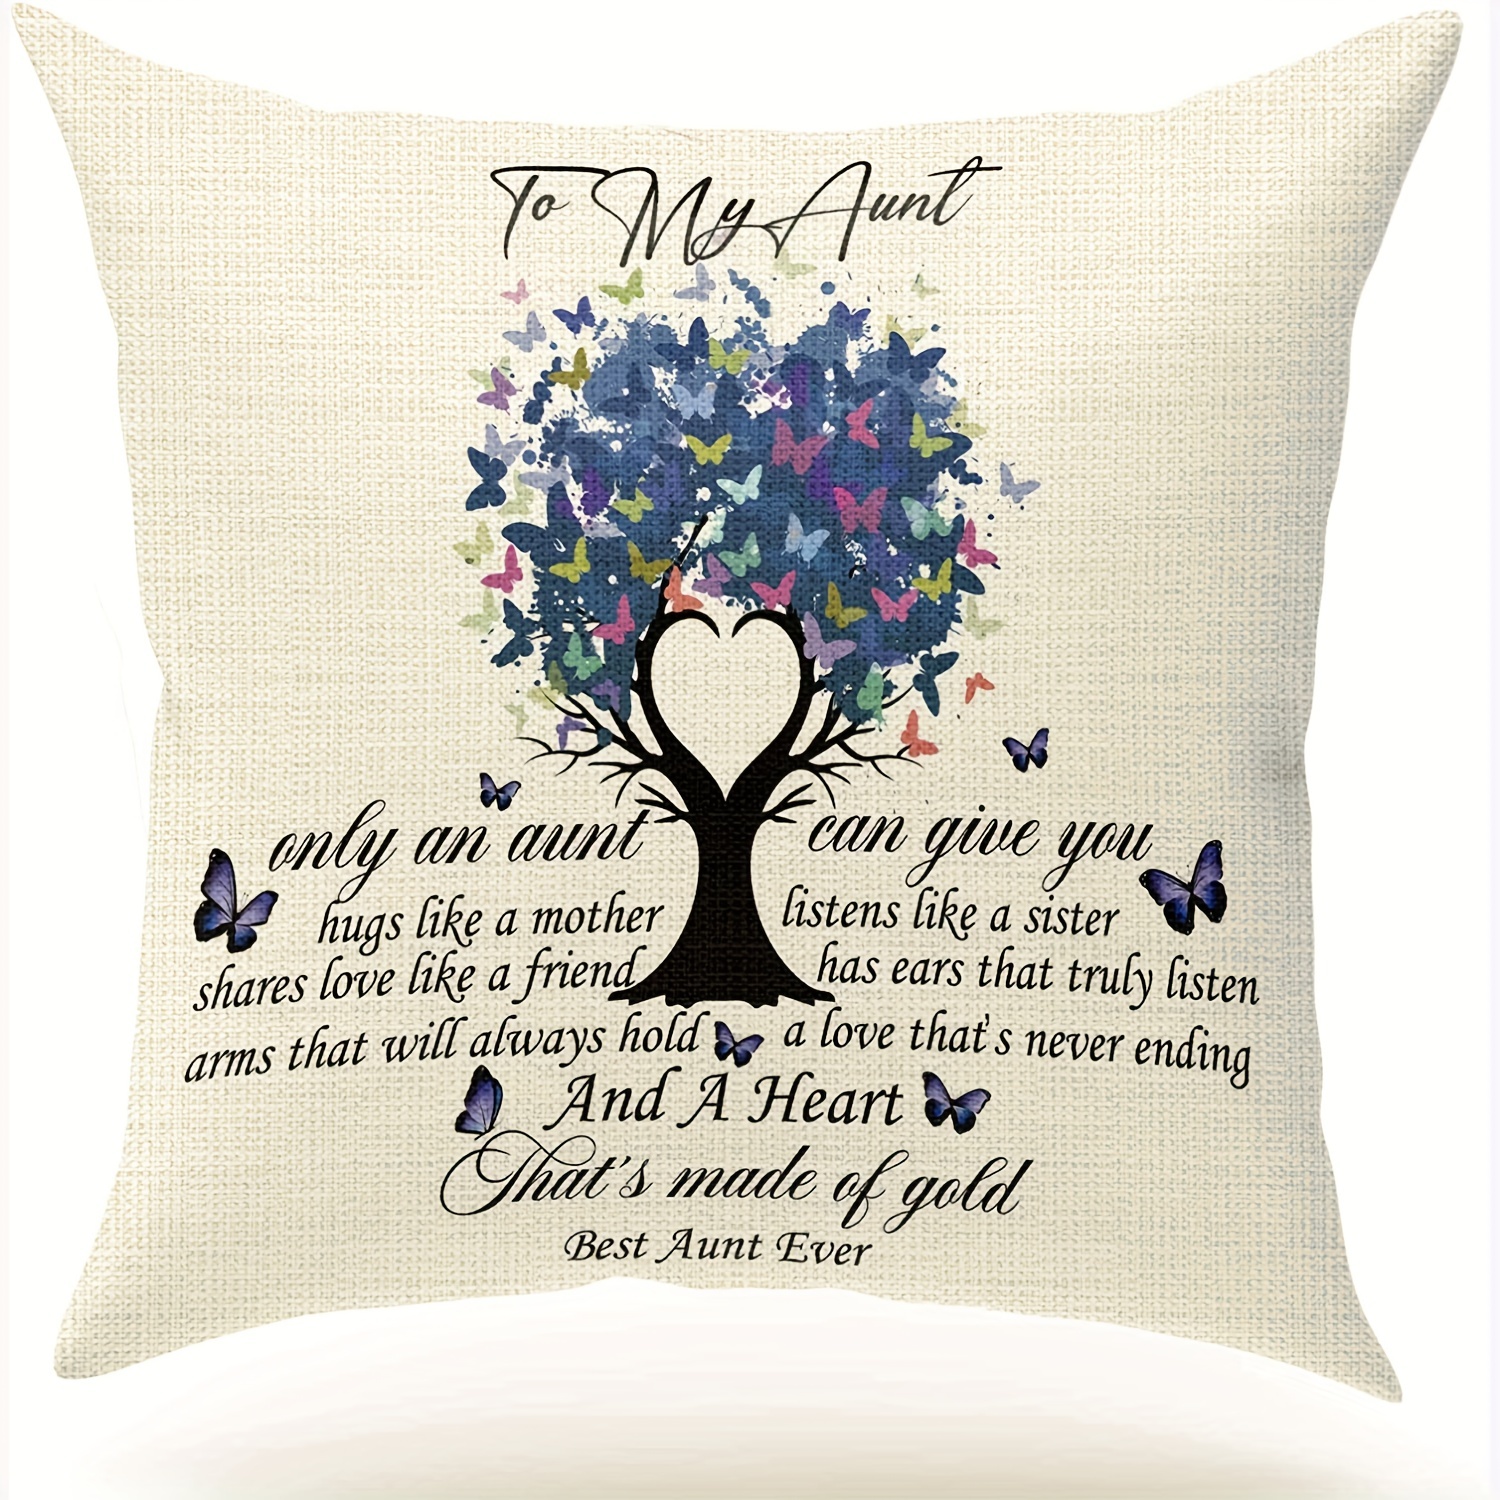  Anniversary Birthday to My Wife I Love You You are Special to  Me Love Husband Cotton Linen Square Throw Waist Pillow Case Decorative  Cushion Cover Pillowcase Sofa 18x 18 : Home